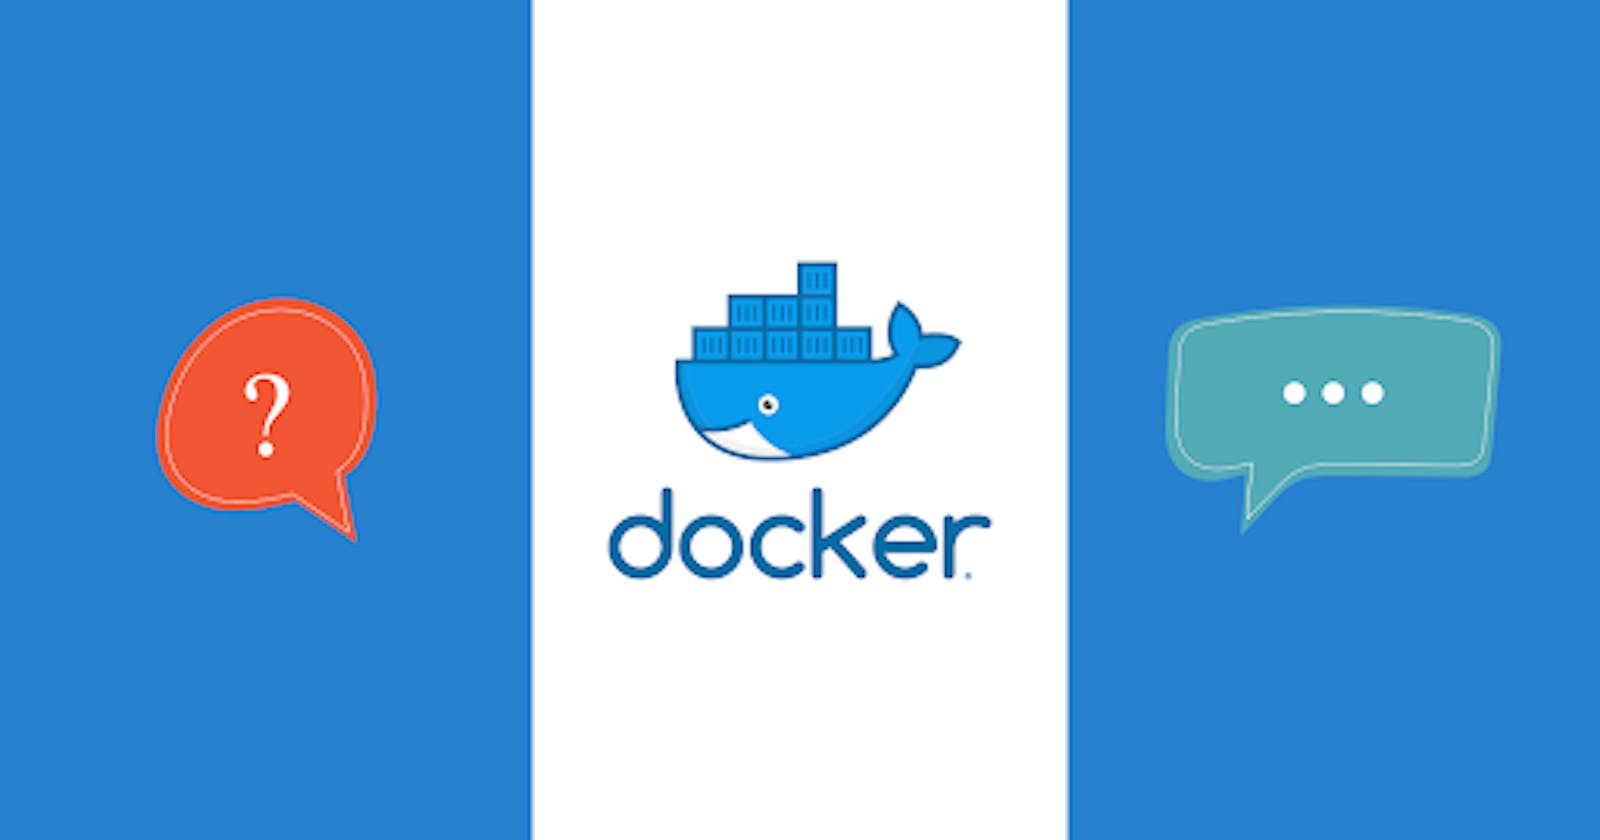 Docker Questions and Exercises